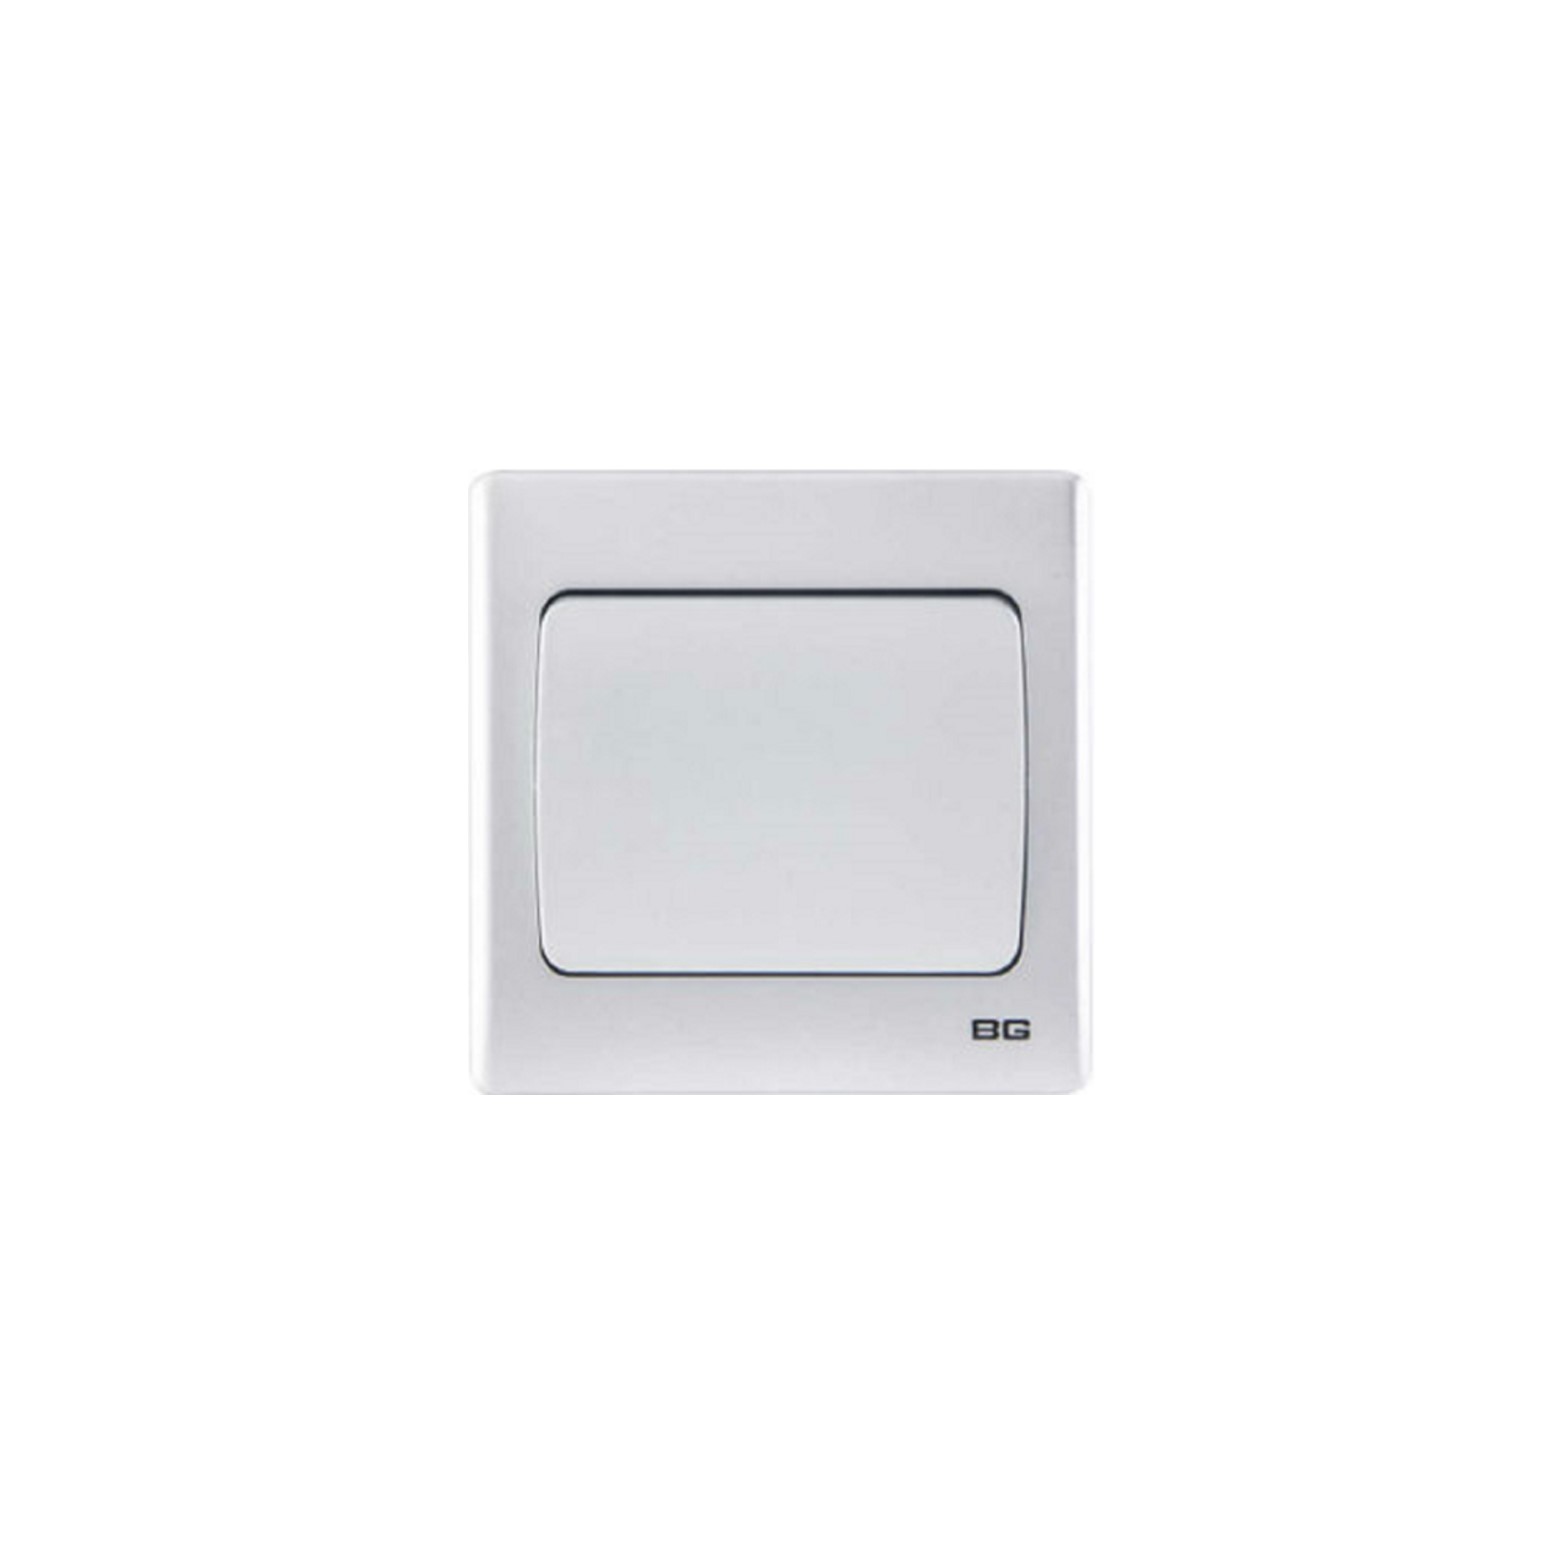 Silver SlimLine 1-Gang 1Way 10AX Switch, single screwless clip-on front plate curved corners(PCSL11W)